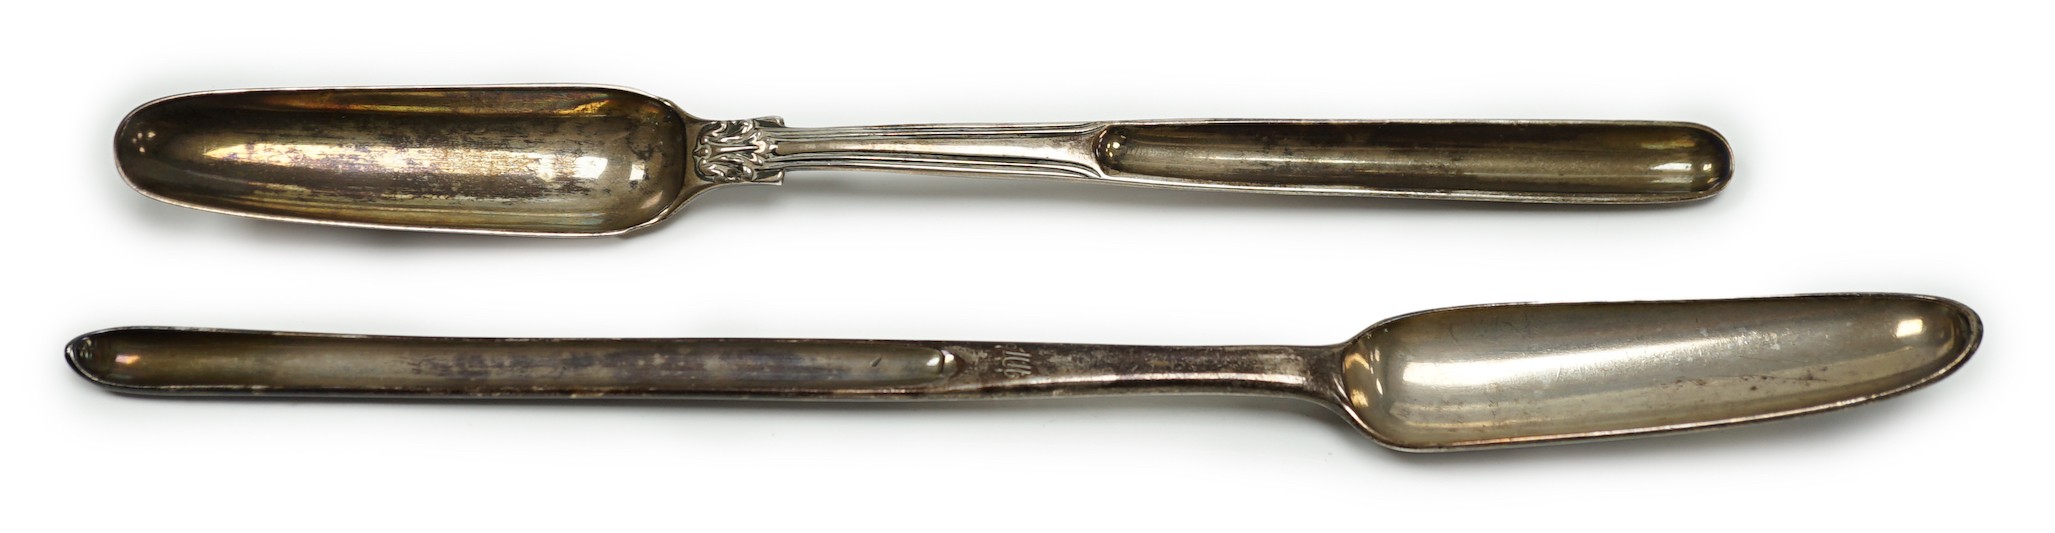 A George III silver marrow scoop, Jacob Marsh, London, 1774, 24.9cm and a George IV silver thread and shell pattern marrow scoop, William Eaton?, London, 1825.                                                             